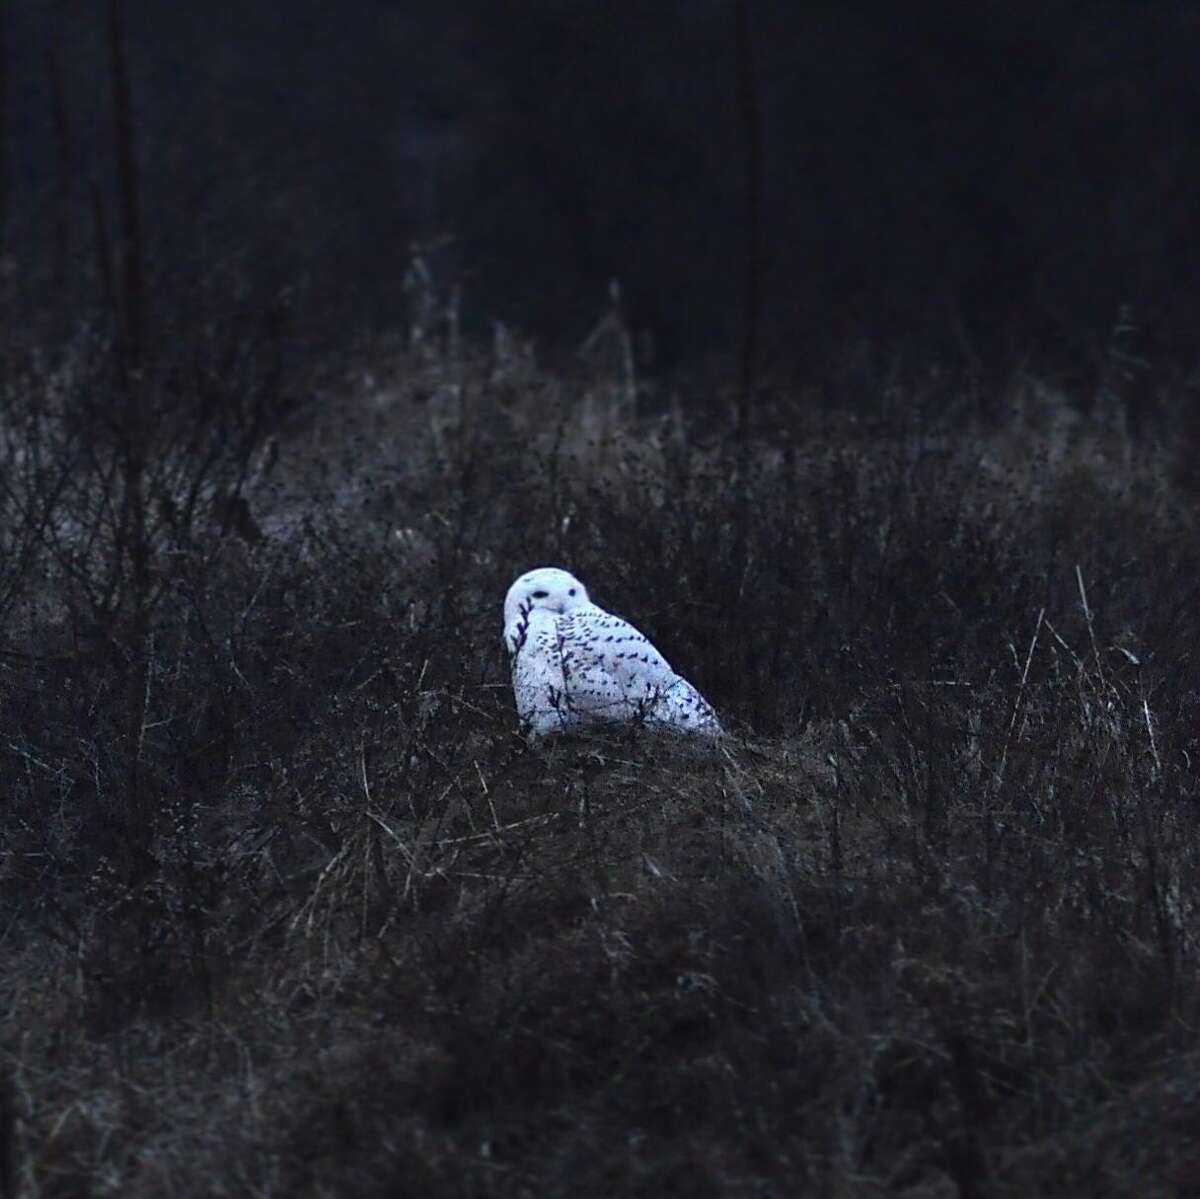 Joyce Bassett, a photographer and Times Union news editor, tried for weeks to capture an image of a snowy owl she knew to be in the area. She finally found him Wednesday, Dec. 26, 2018. And she  watched for more than an hour Thursday as he perched in a field and surveyed his terrain.